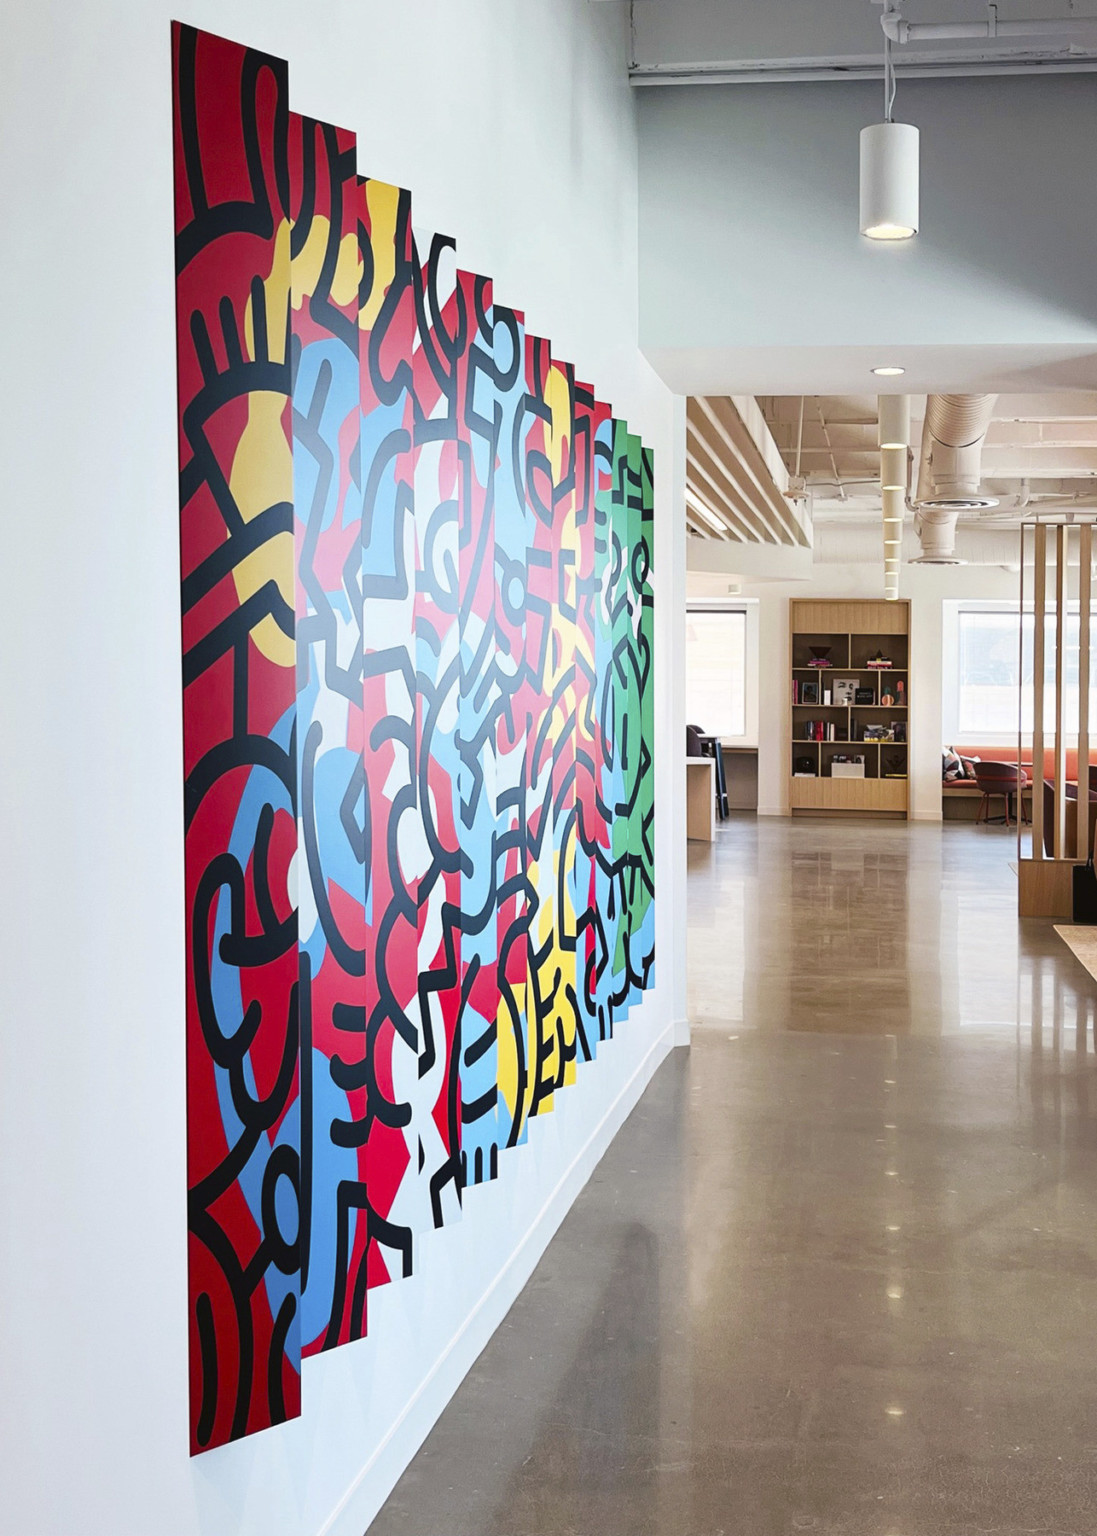 deconstructed keith haring style art installation line polished concrete hallway in neutral office with white walls, ceilings